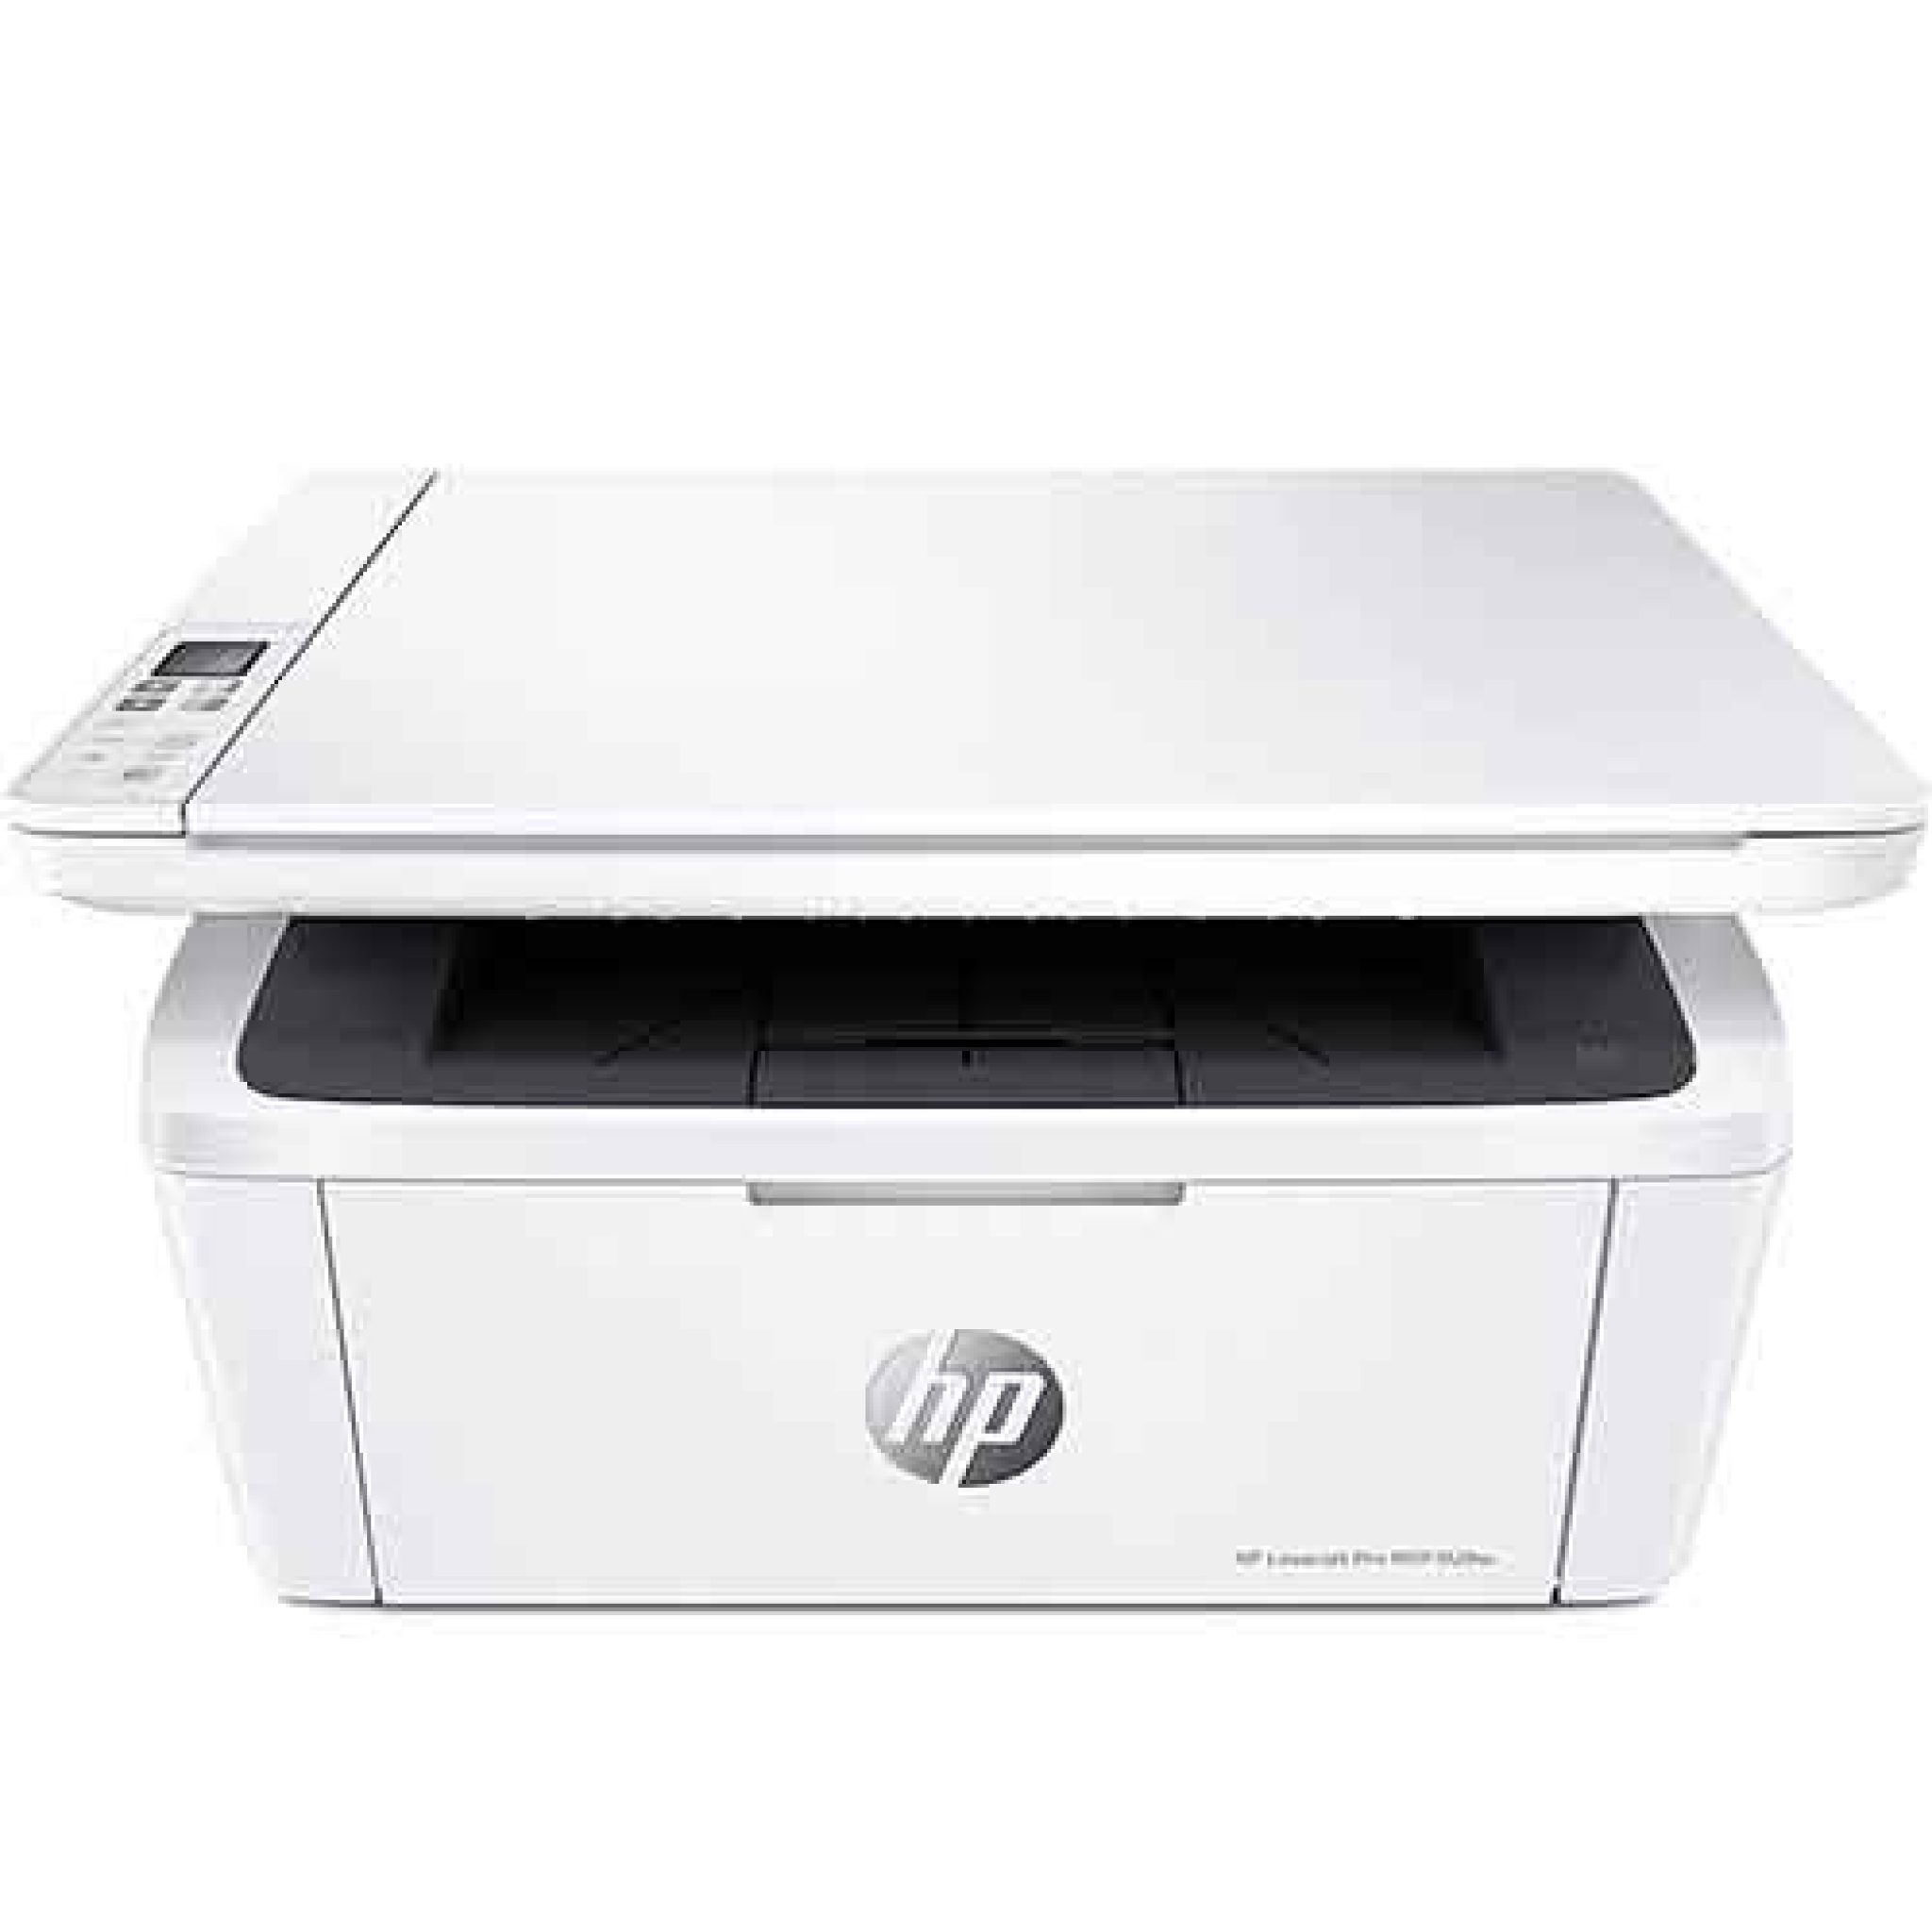 Hp Laserjet Pro Mfp M28w Wireless All In One Black And White Printer Print Scan Copy Fax 5595